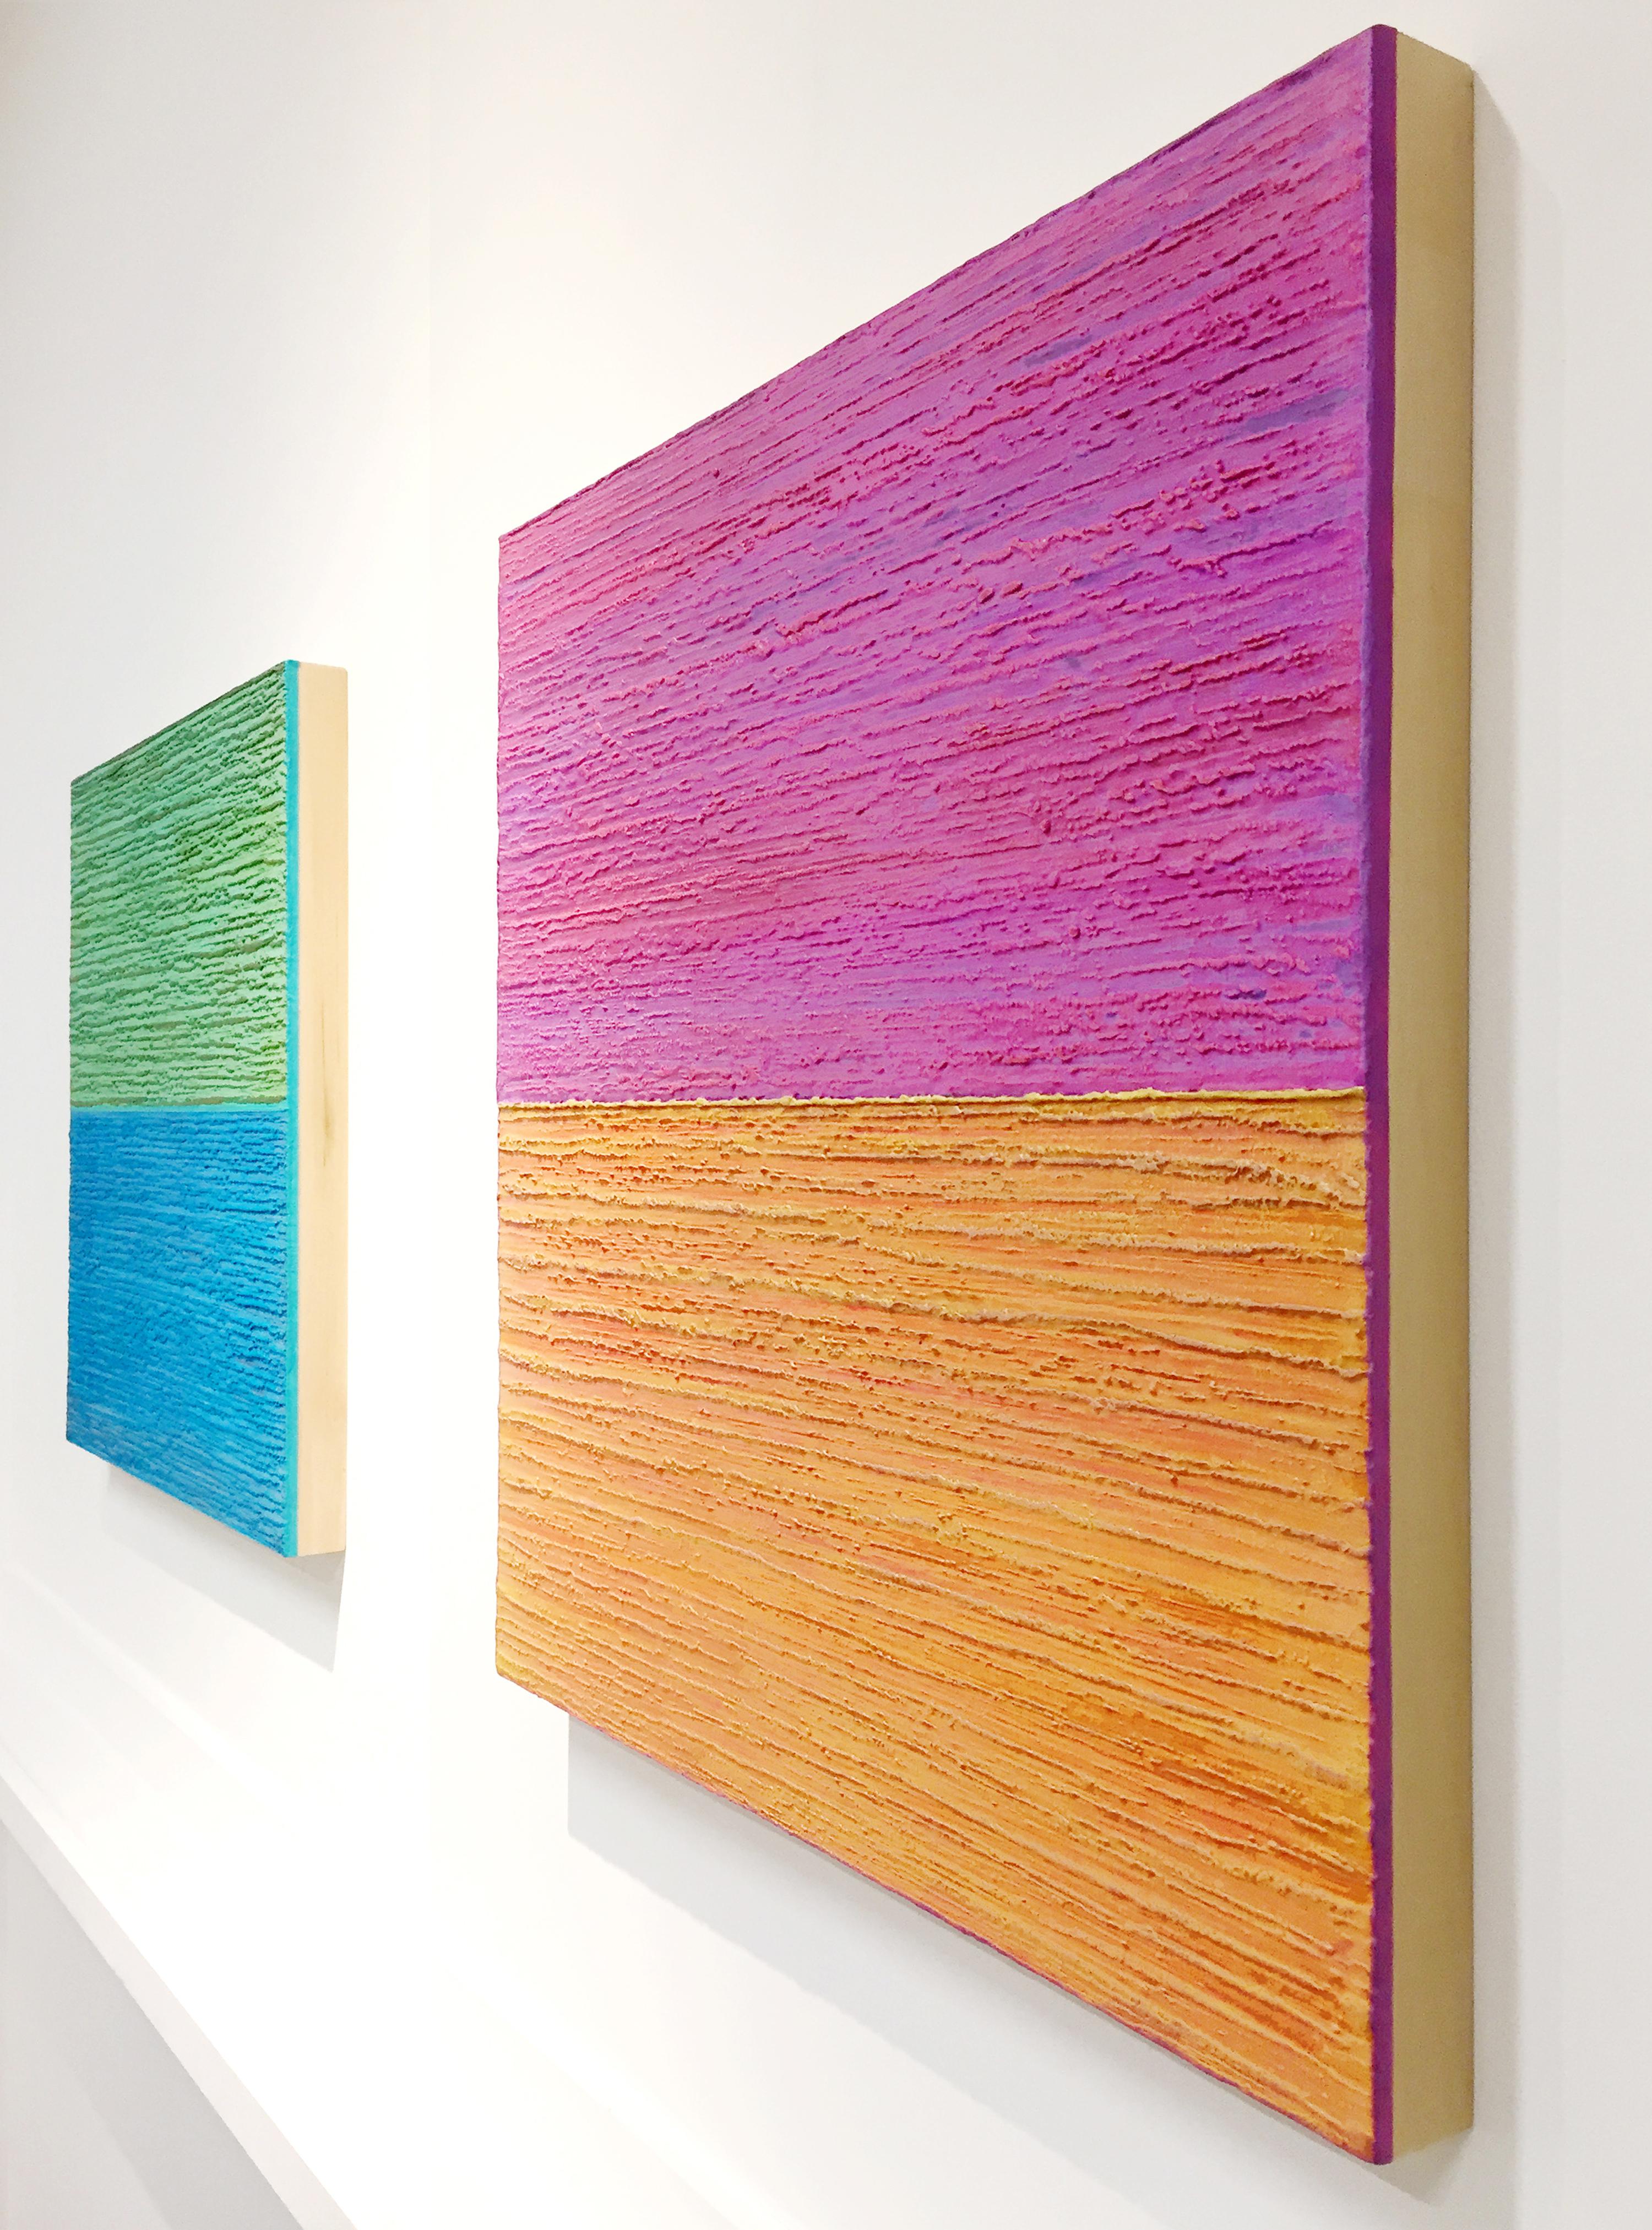 This is a square, vibrant orange and purple encaustic (pigmented beeswax) painting on birch panel accented with bright pink and subtle gold details. Signed, dated and titled on verso.

Joanne Mattera’s paintings can be described as lush minimalism,